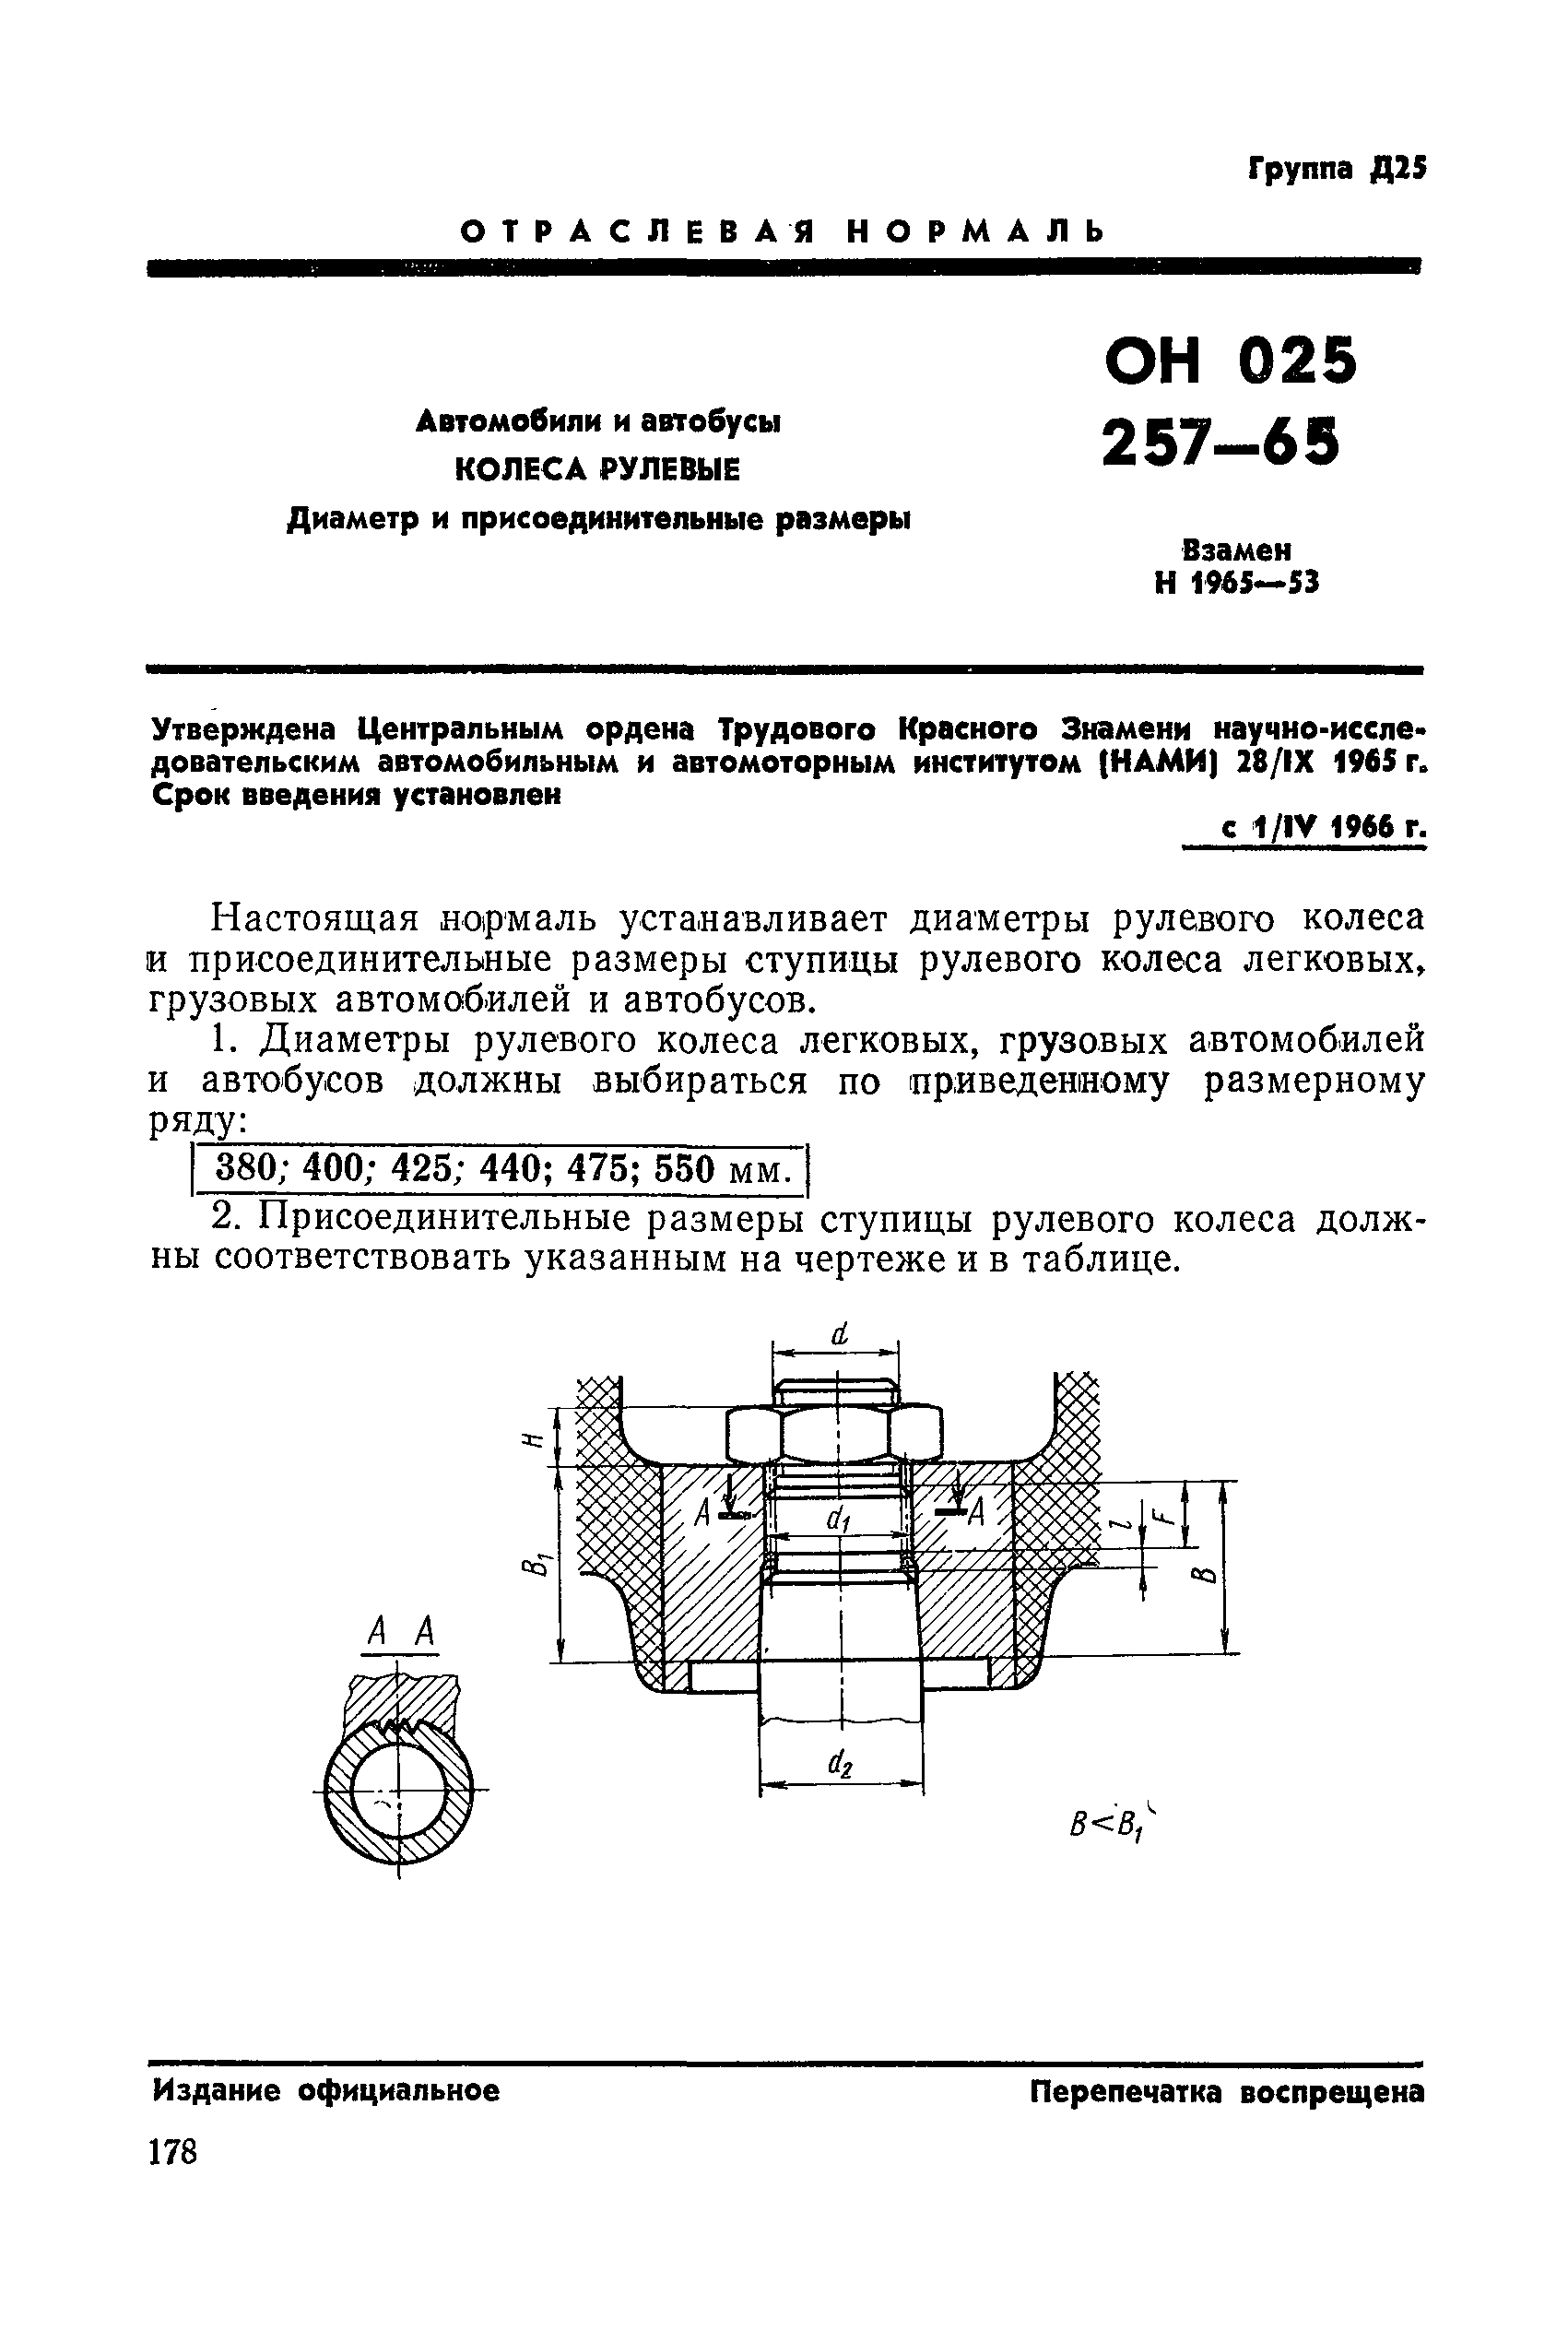 ОН 025 257-65